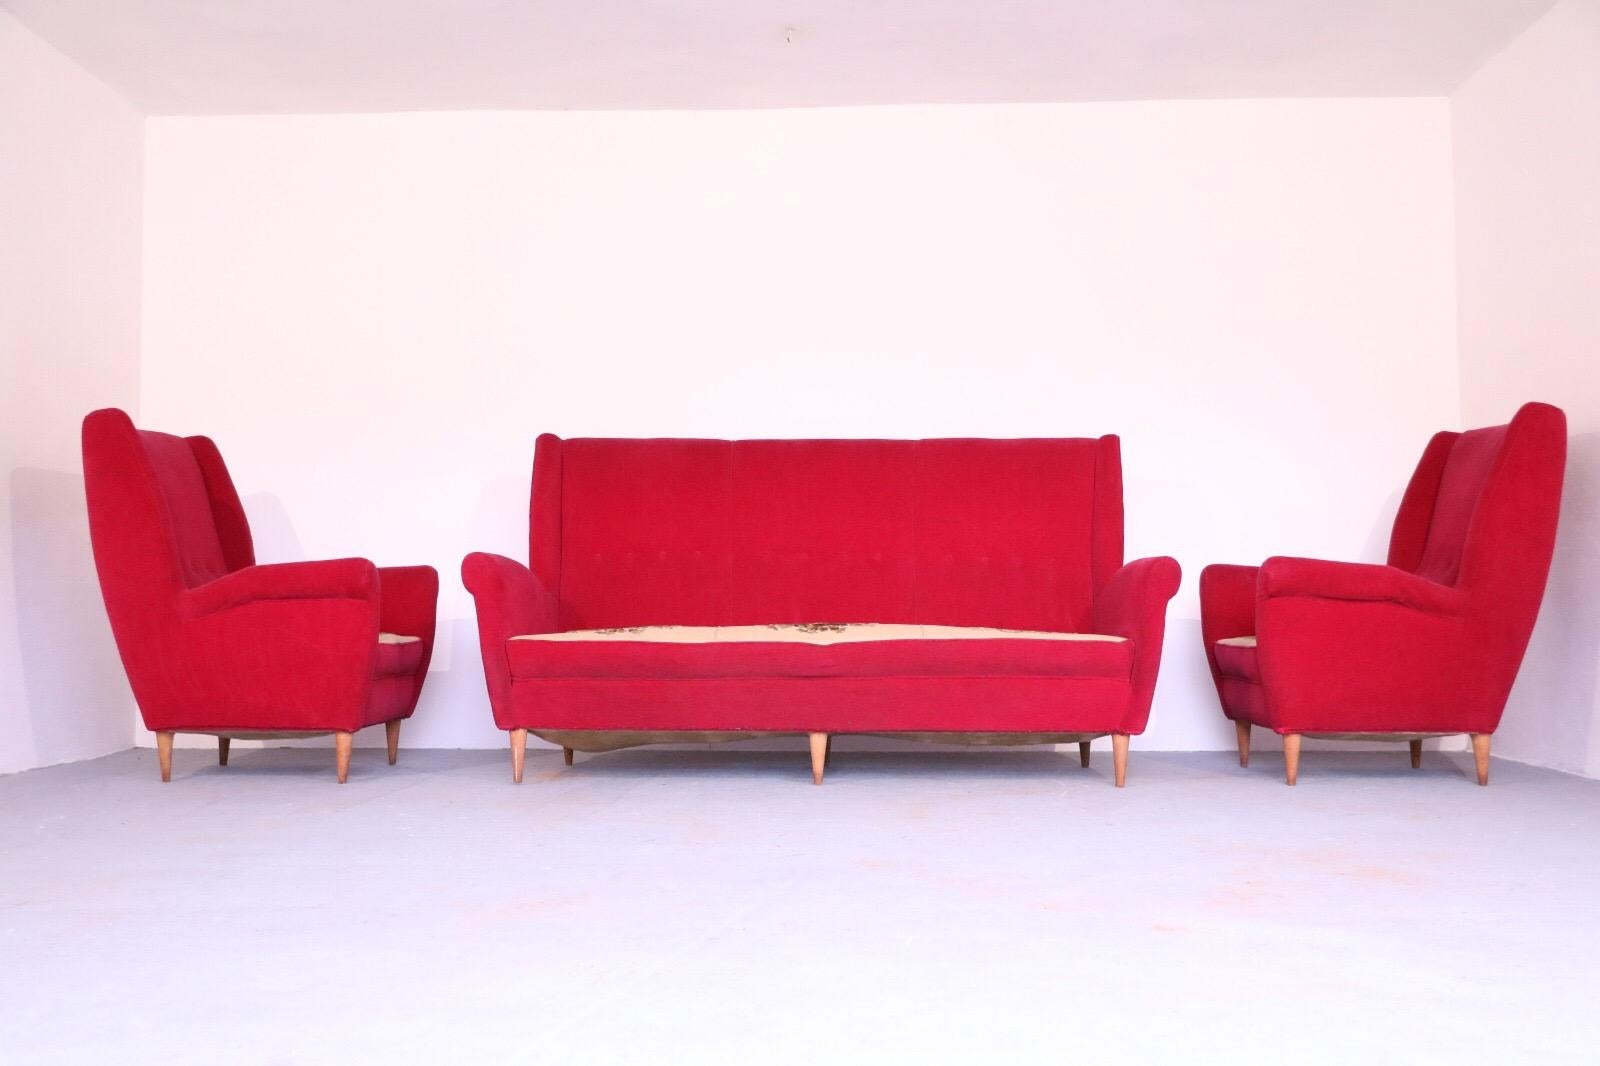 ItalianModern Neoclassical Sofa & Armchairs by Gio Ponti for ISA, Bergamo, 1955 In Good Condition In New York, NY